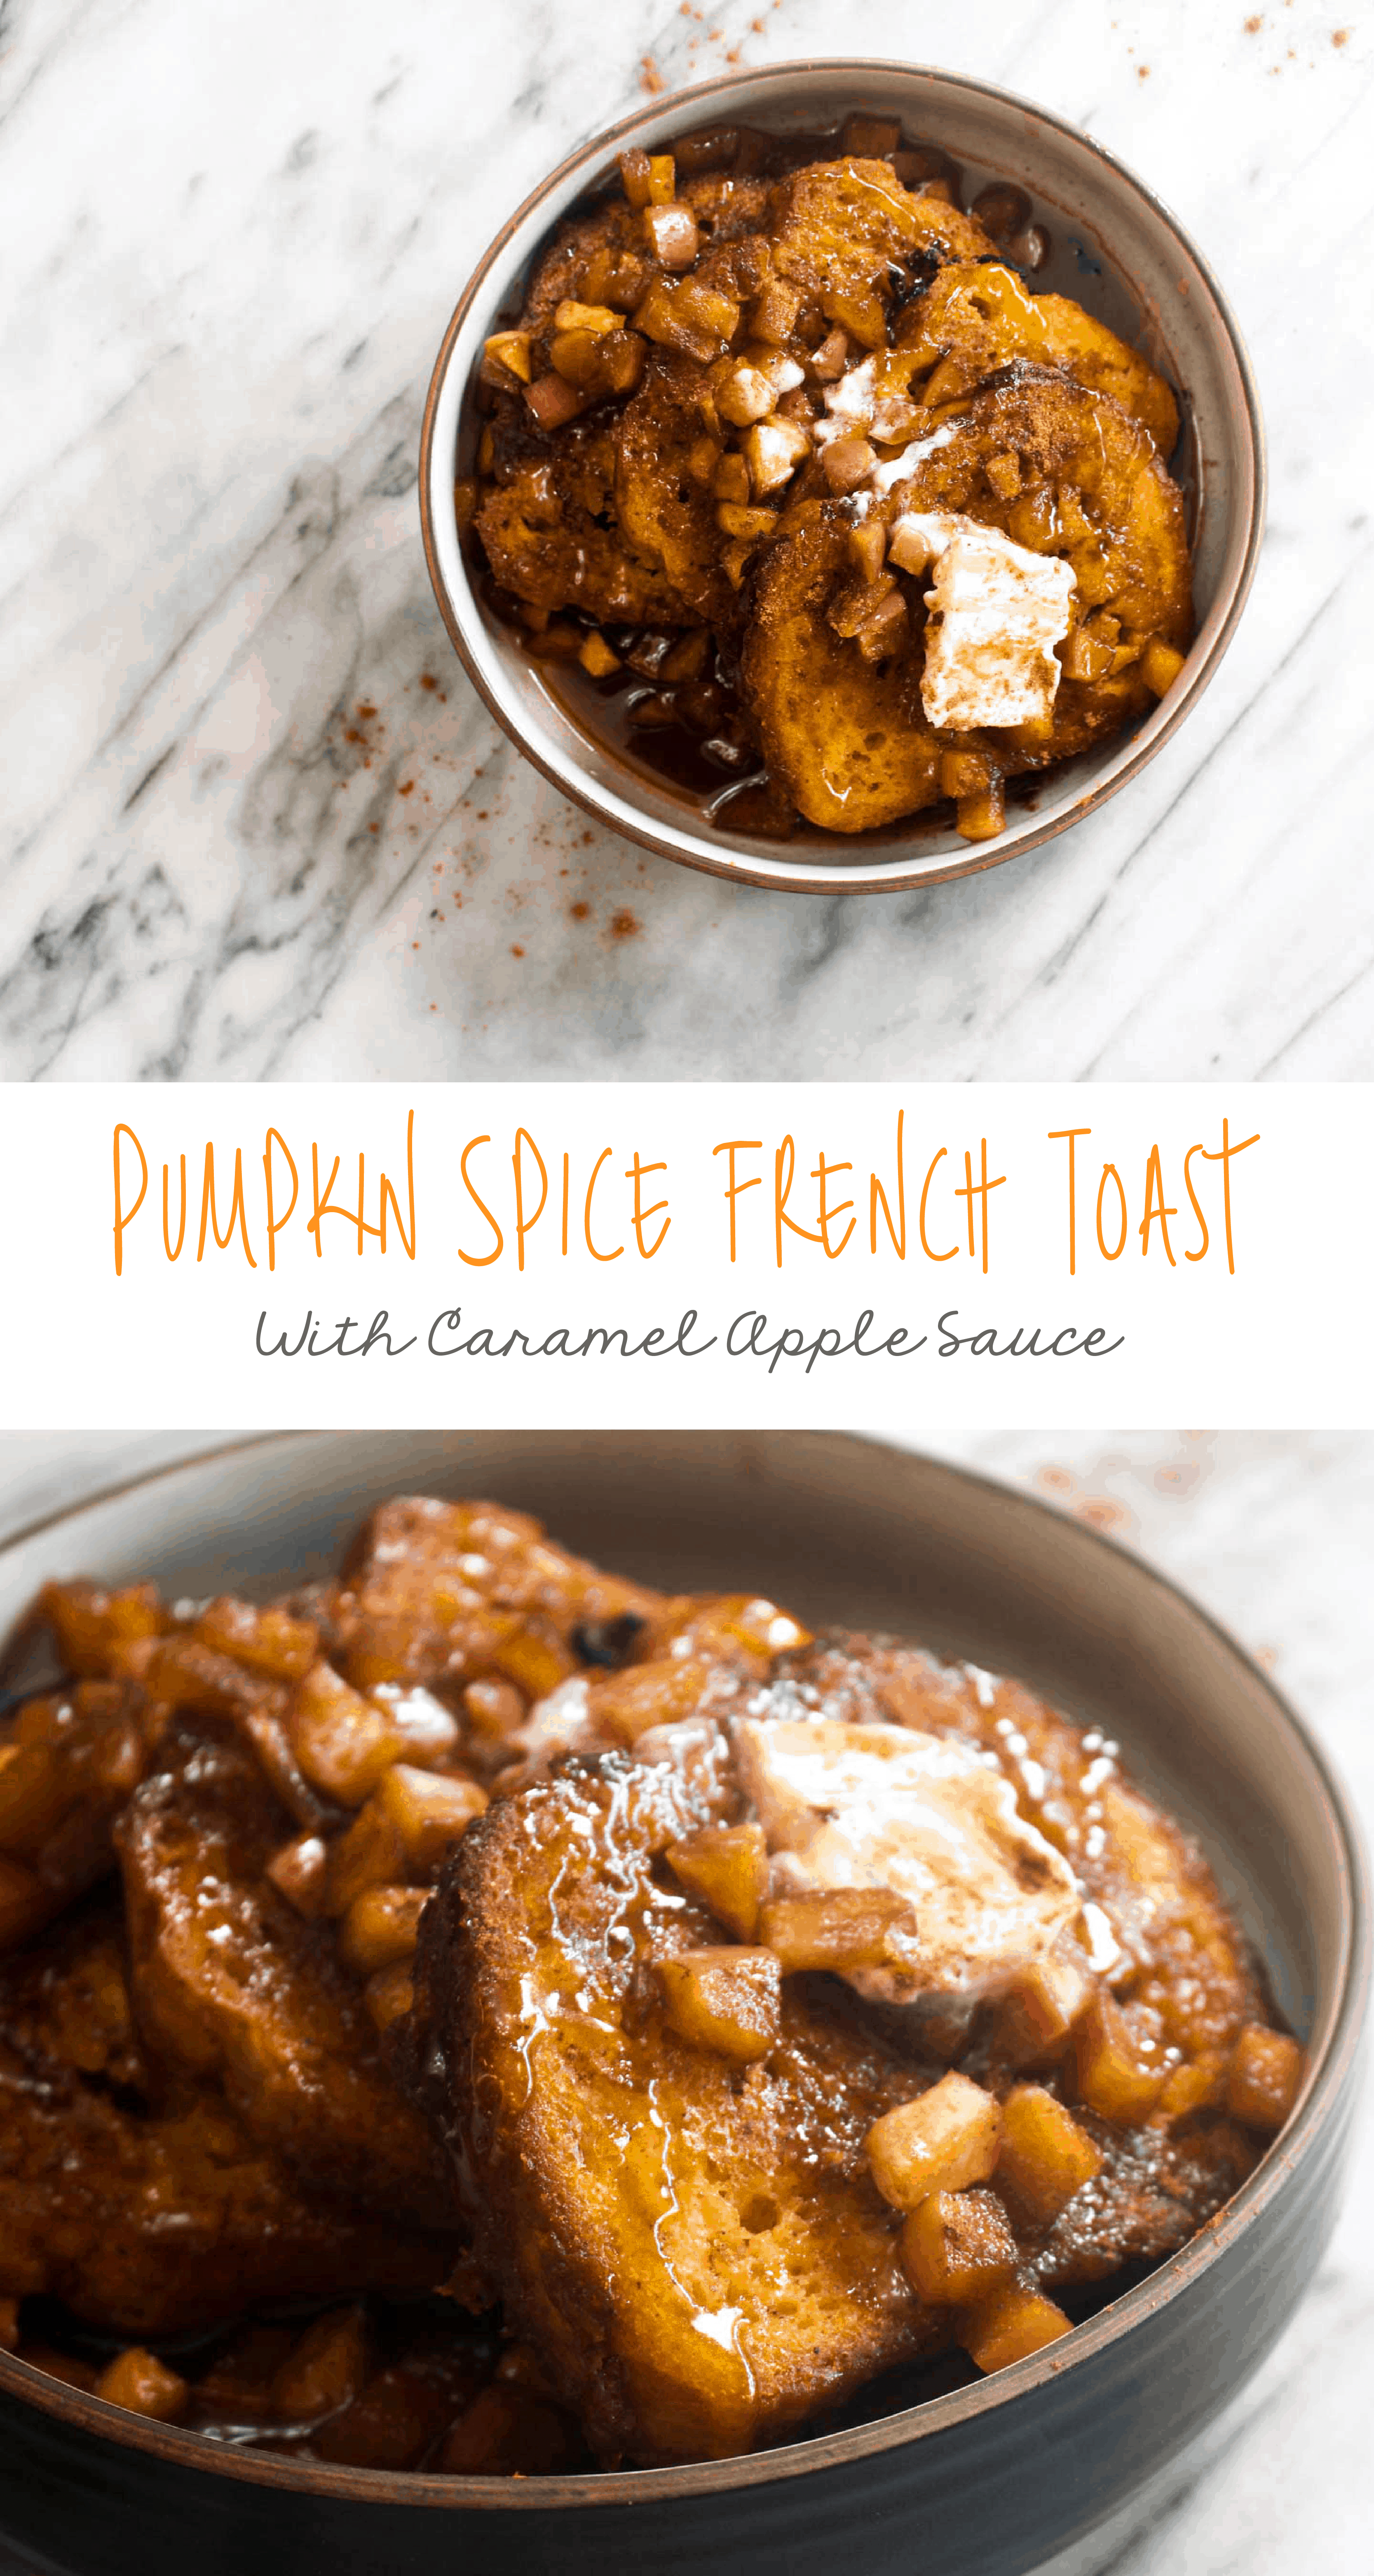 Pumpkin spice french toast collage